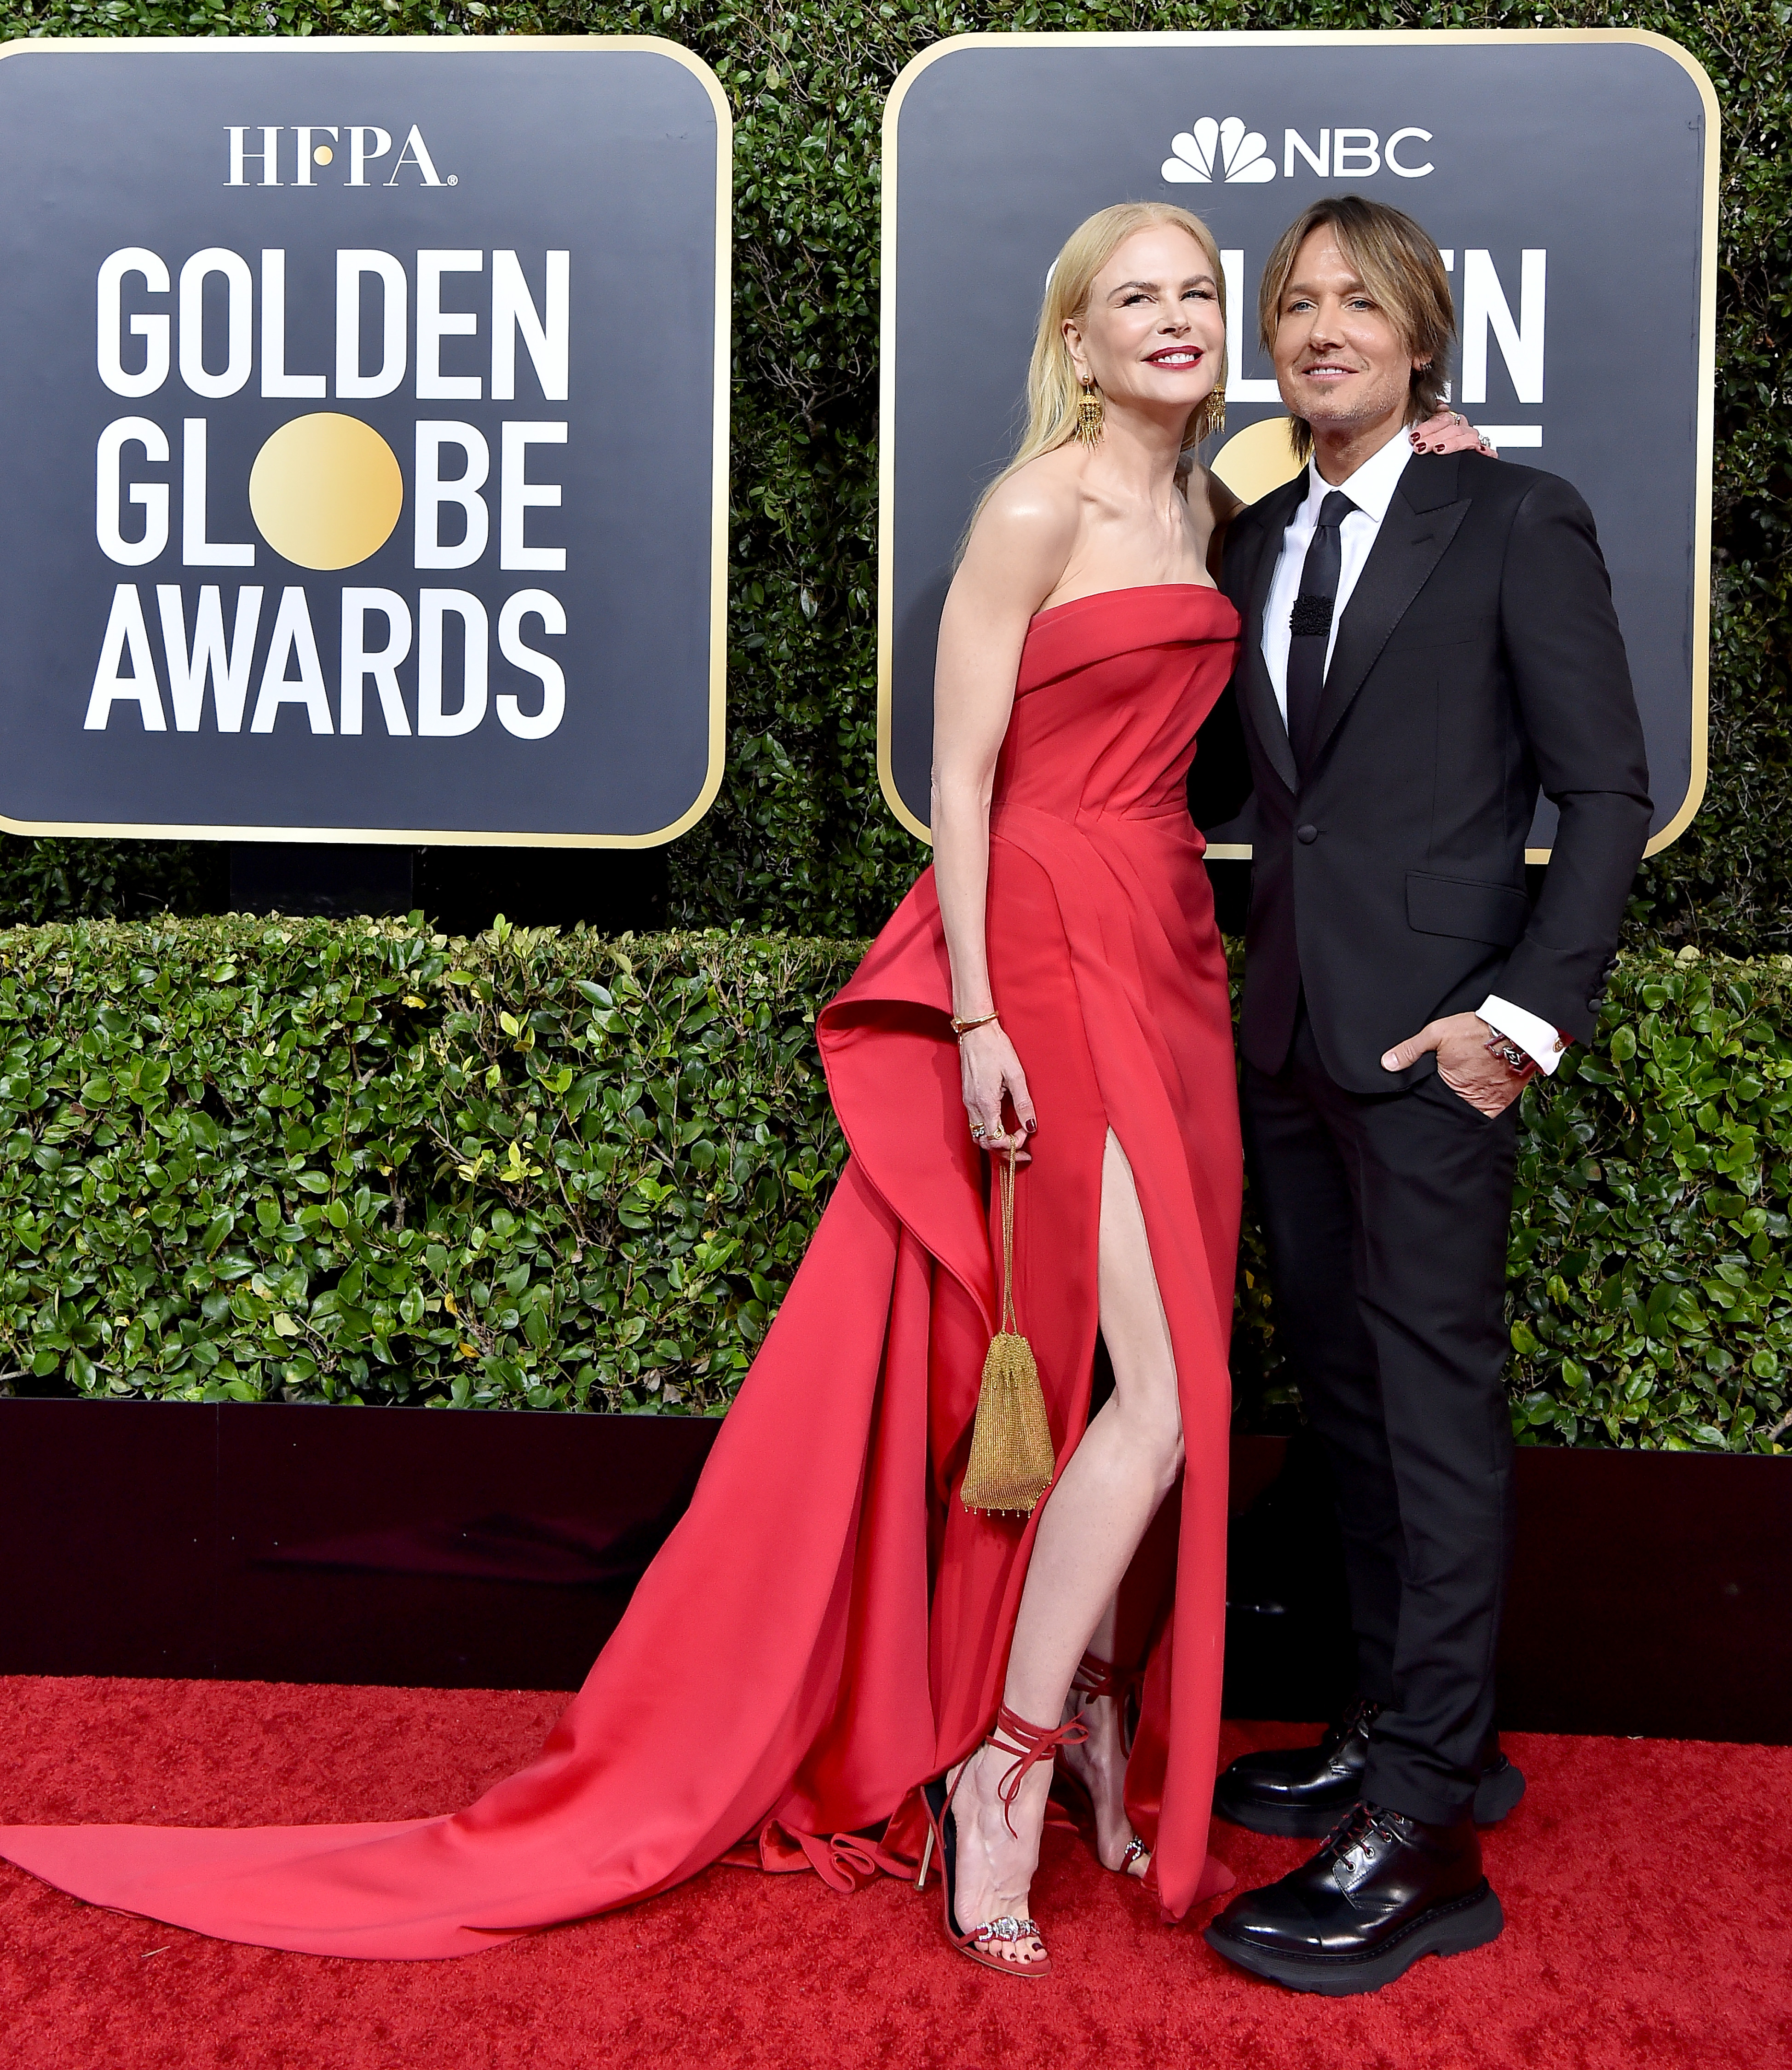 Nicole Kidman and Keith Urban attend the 77th Annual Golden Globe Awards in Beverly Hills, California, on January 5, 2020. | Source: Getty Images